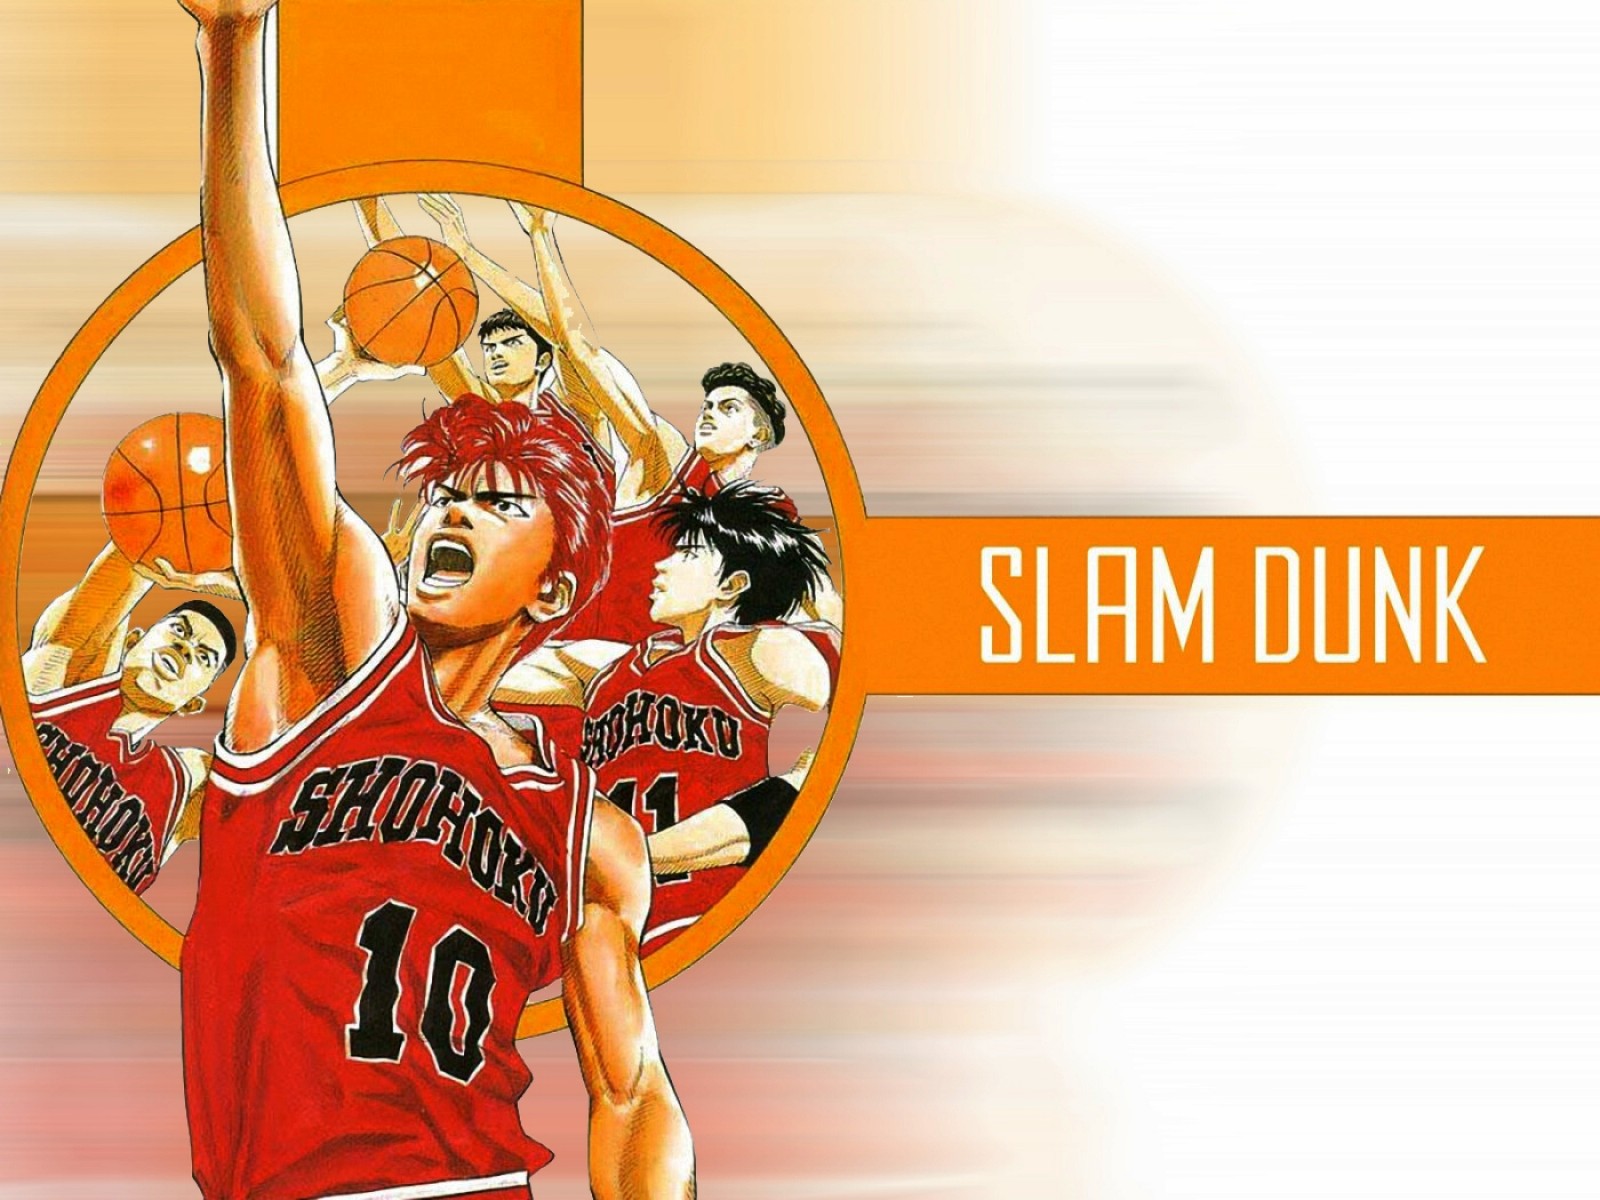 Free Download Slam Dunk Anime Hd Wallpaper Animation Wallpapers